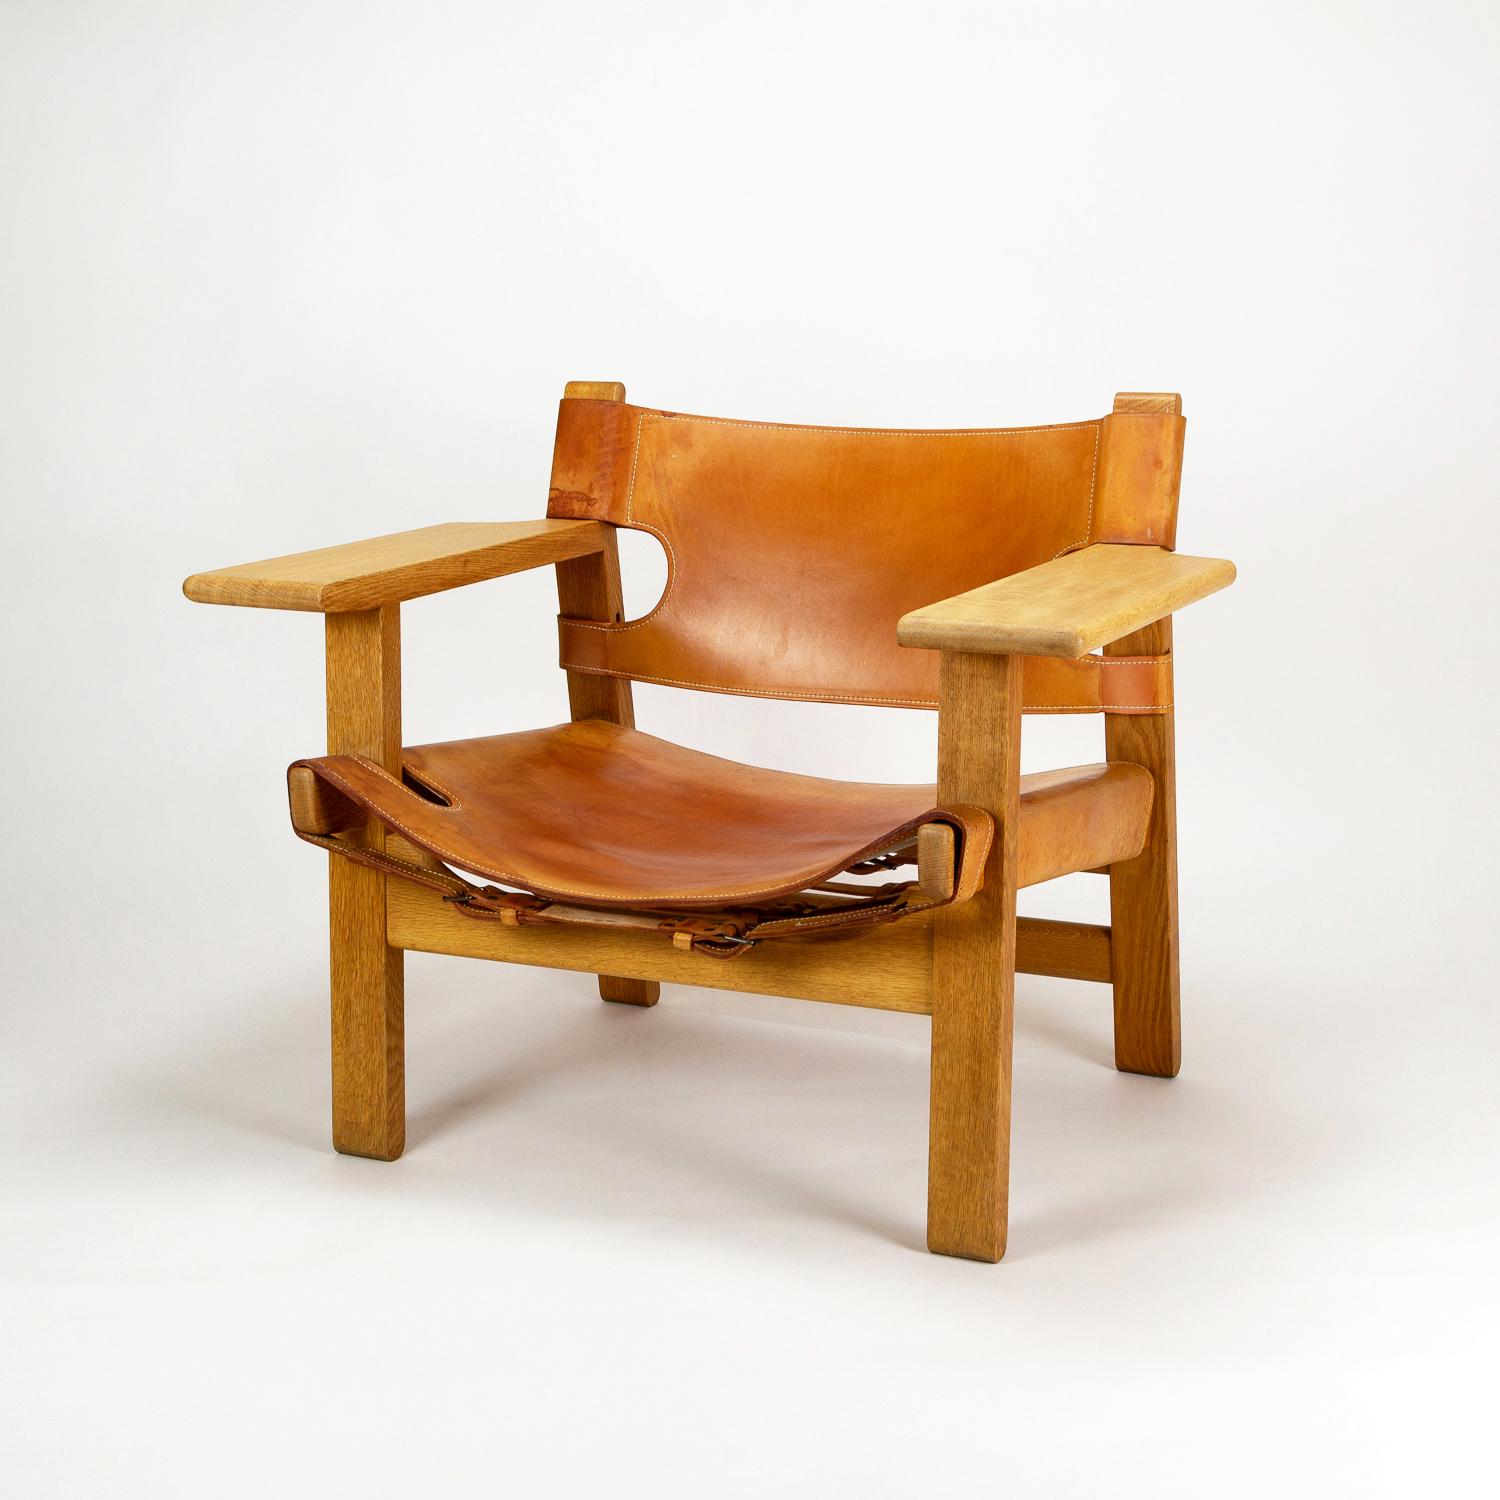 The iconic Spanish chair, model BM2226 by Børge Mogensen in cognac leather and solid oak. Designed in 1958. Fredericia, Denmark, 1960s. The oak has been soap treated and the leather conditioned.